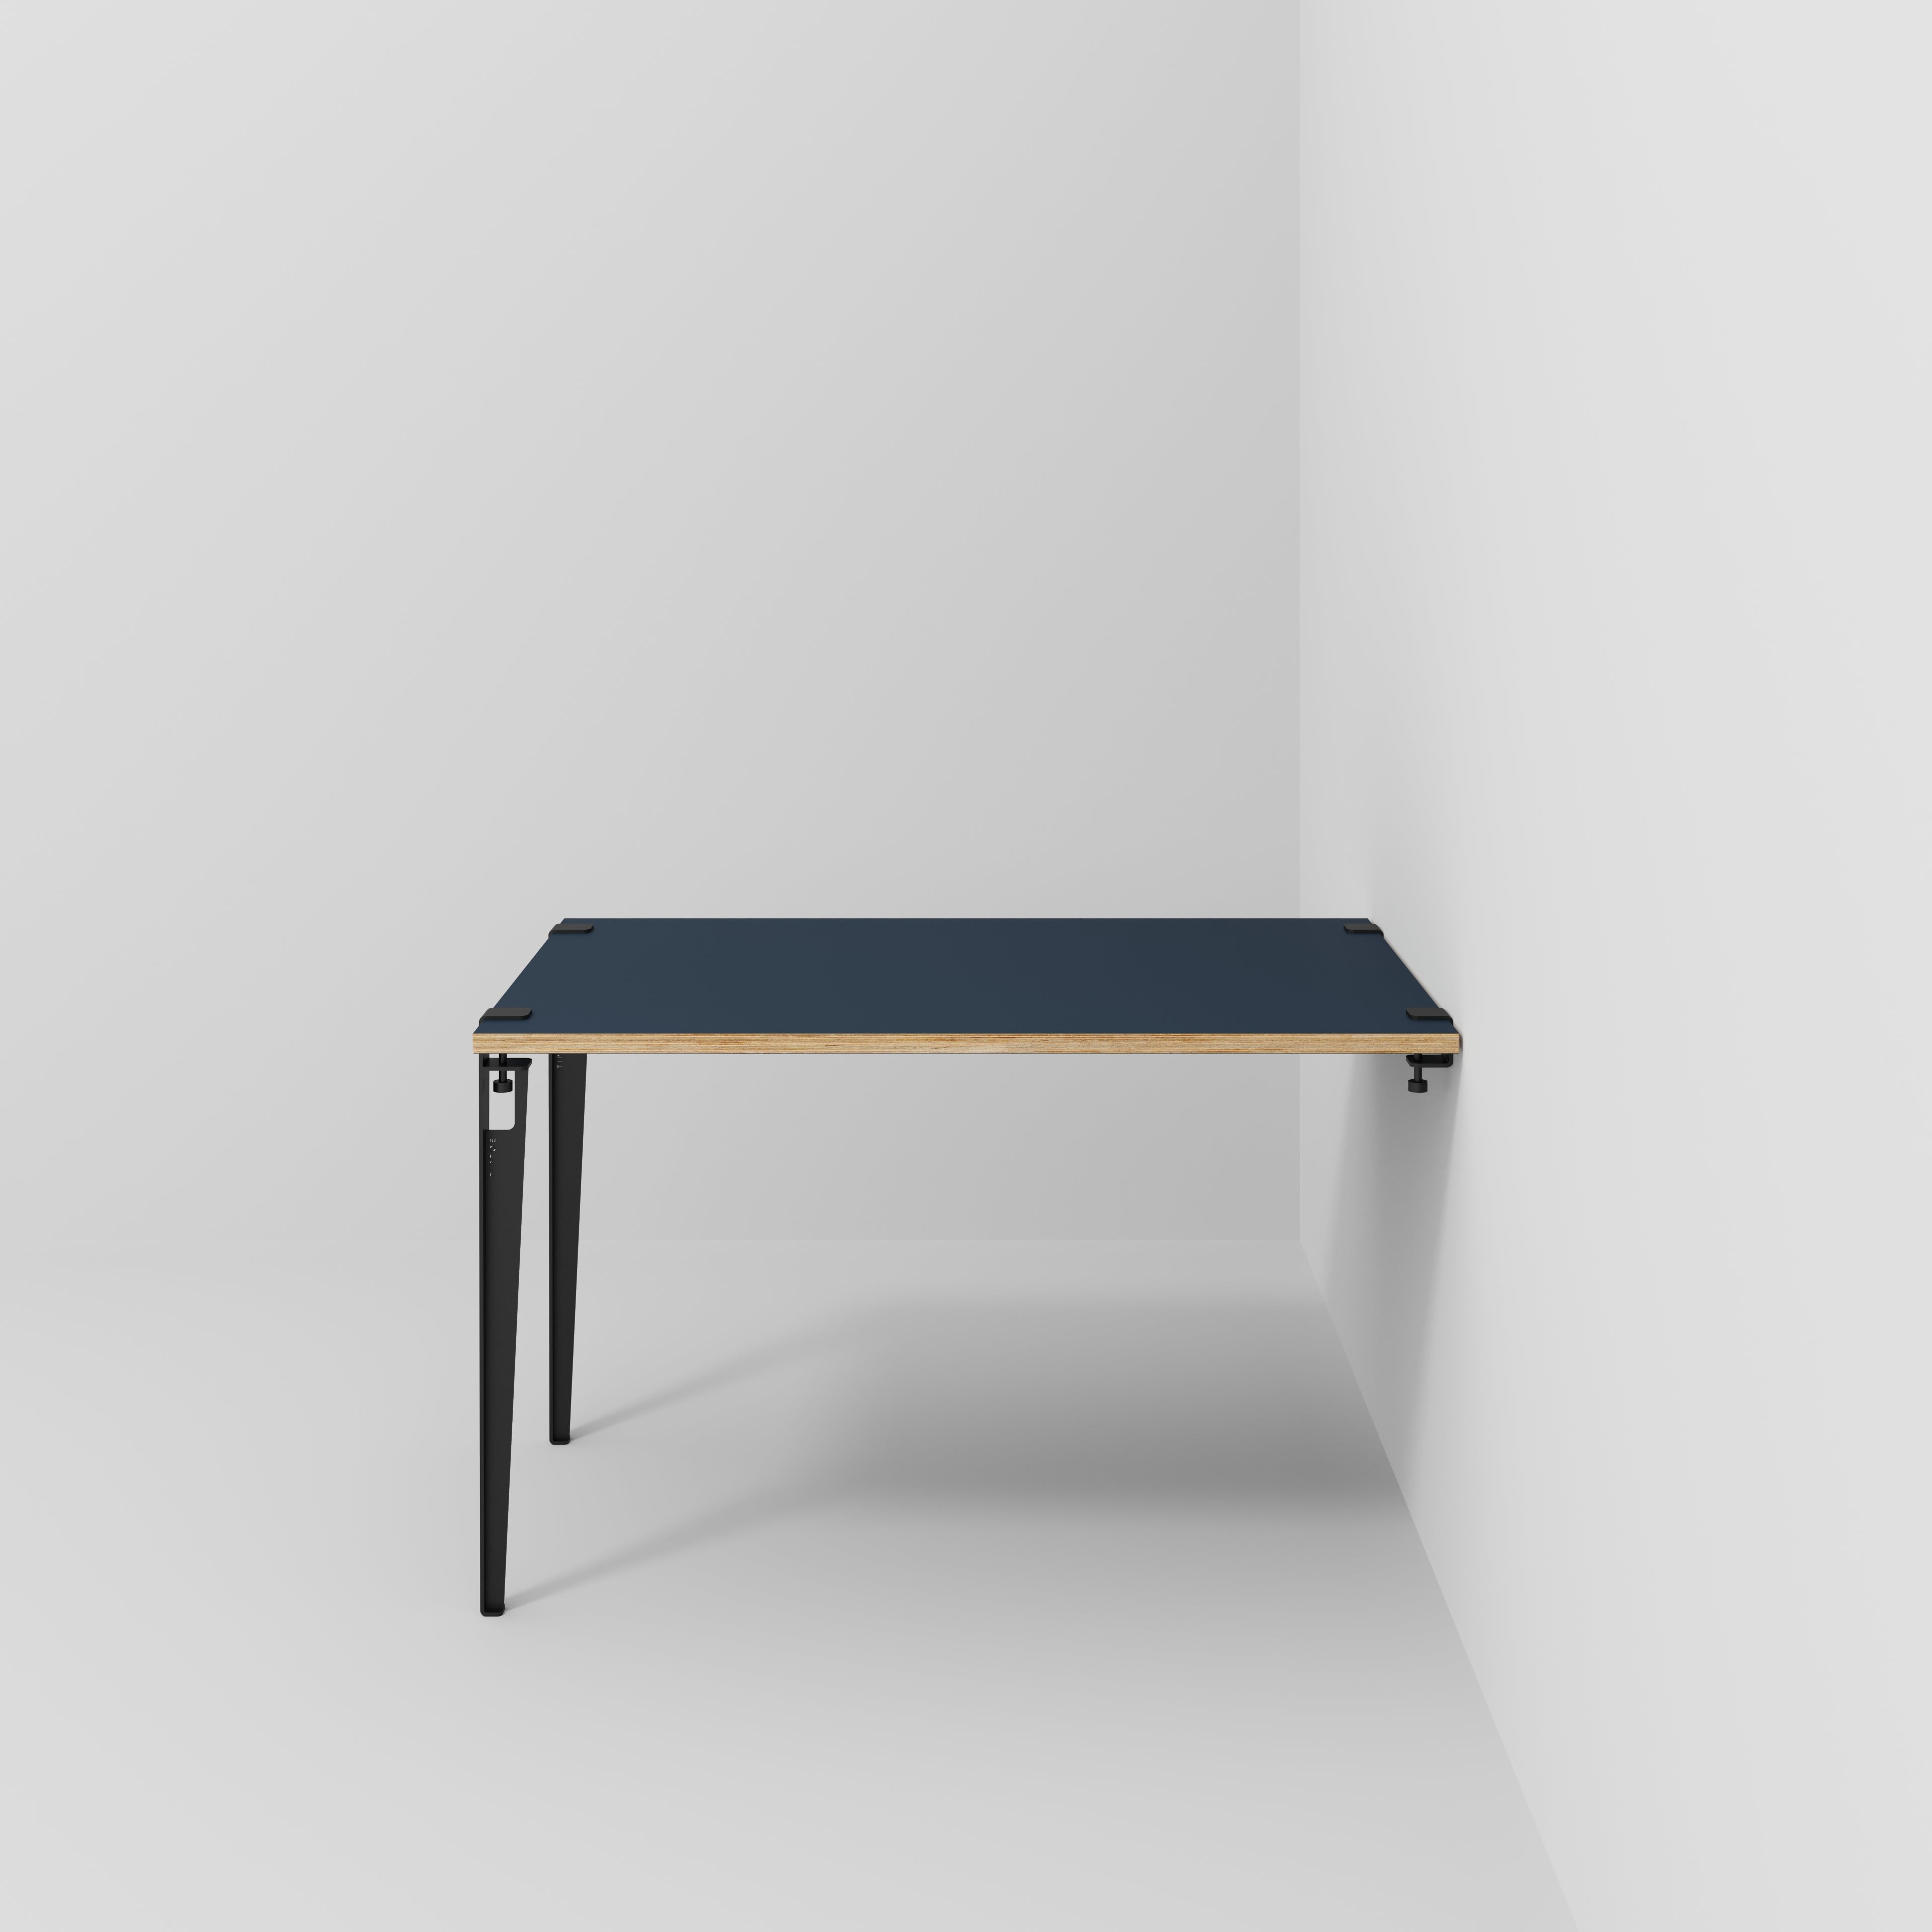 Wall Table with Black Tiptoe Legs and Brackets - Formica Night Sea Blue - 1200(w) x 800(d) x 750(h)